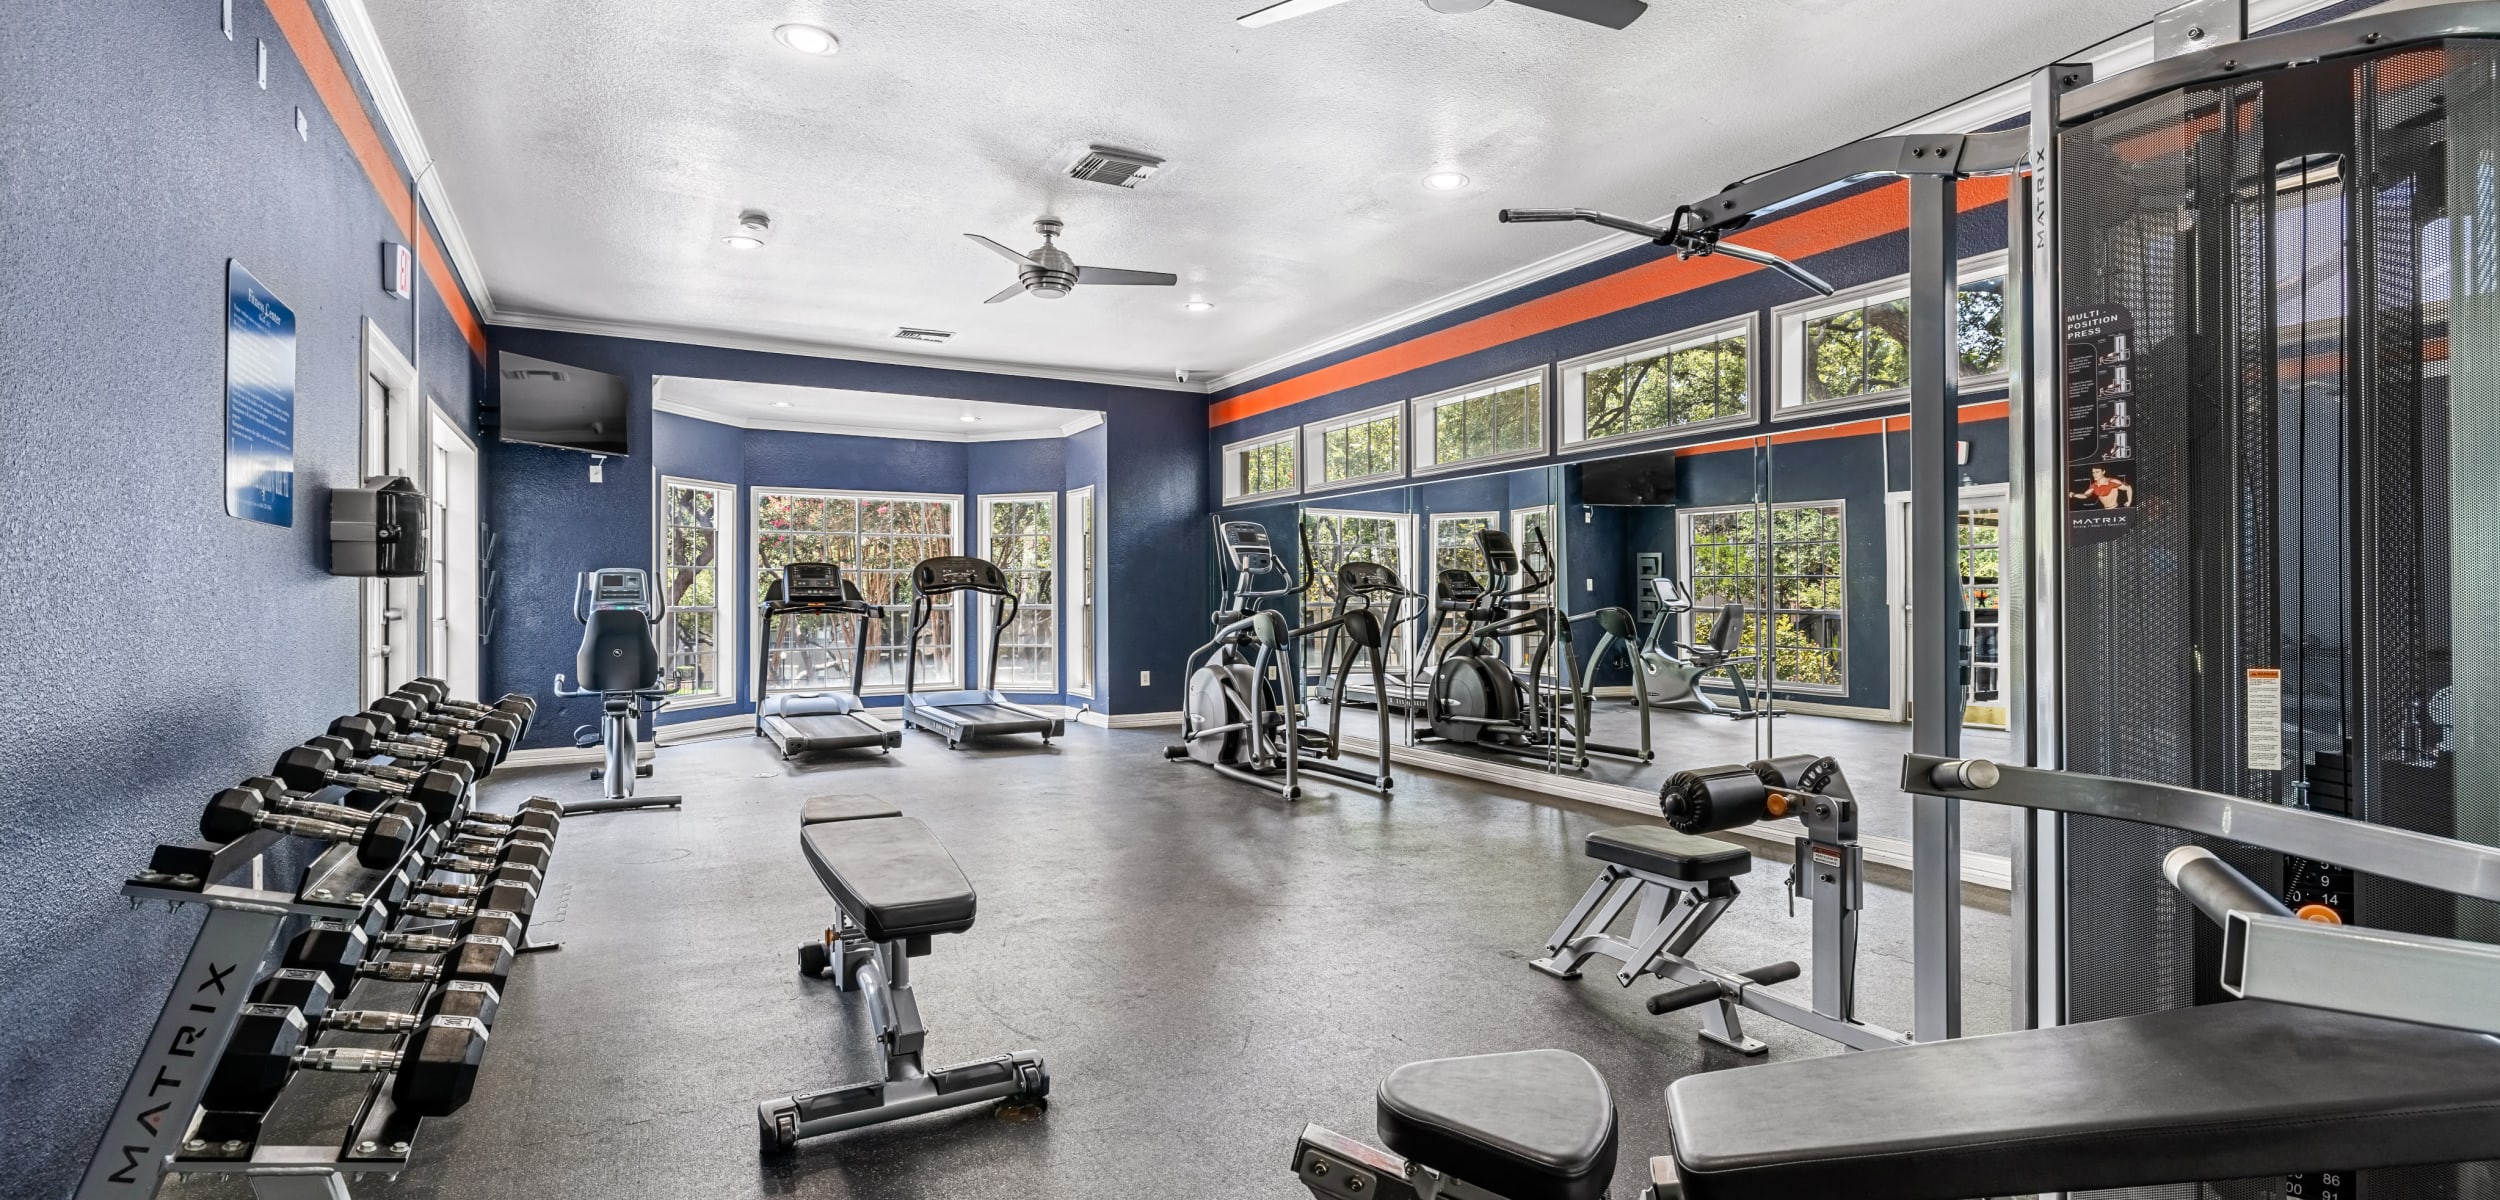 Fitness center at Marquis at Deerfield in San Antonio, Texas